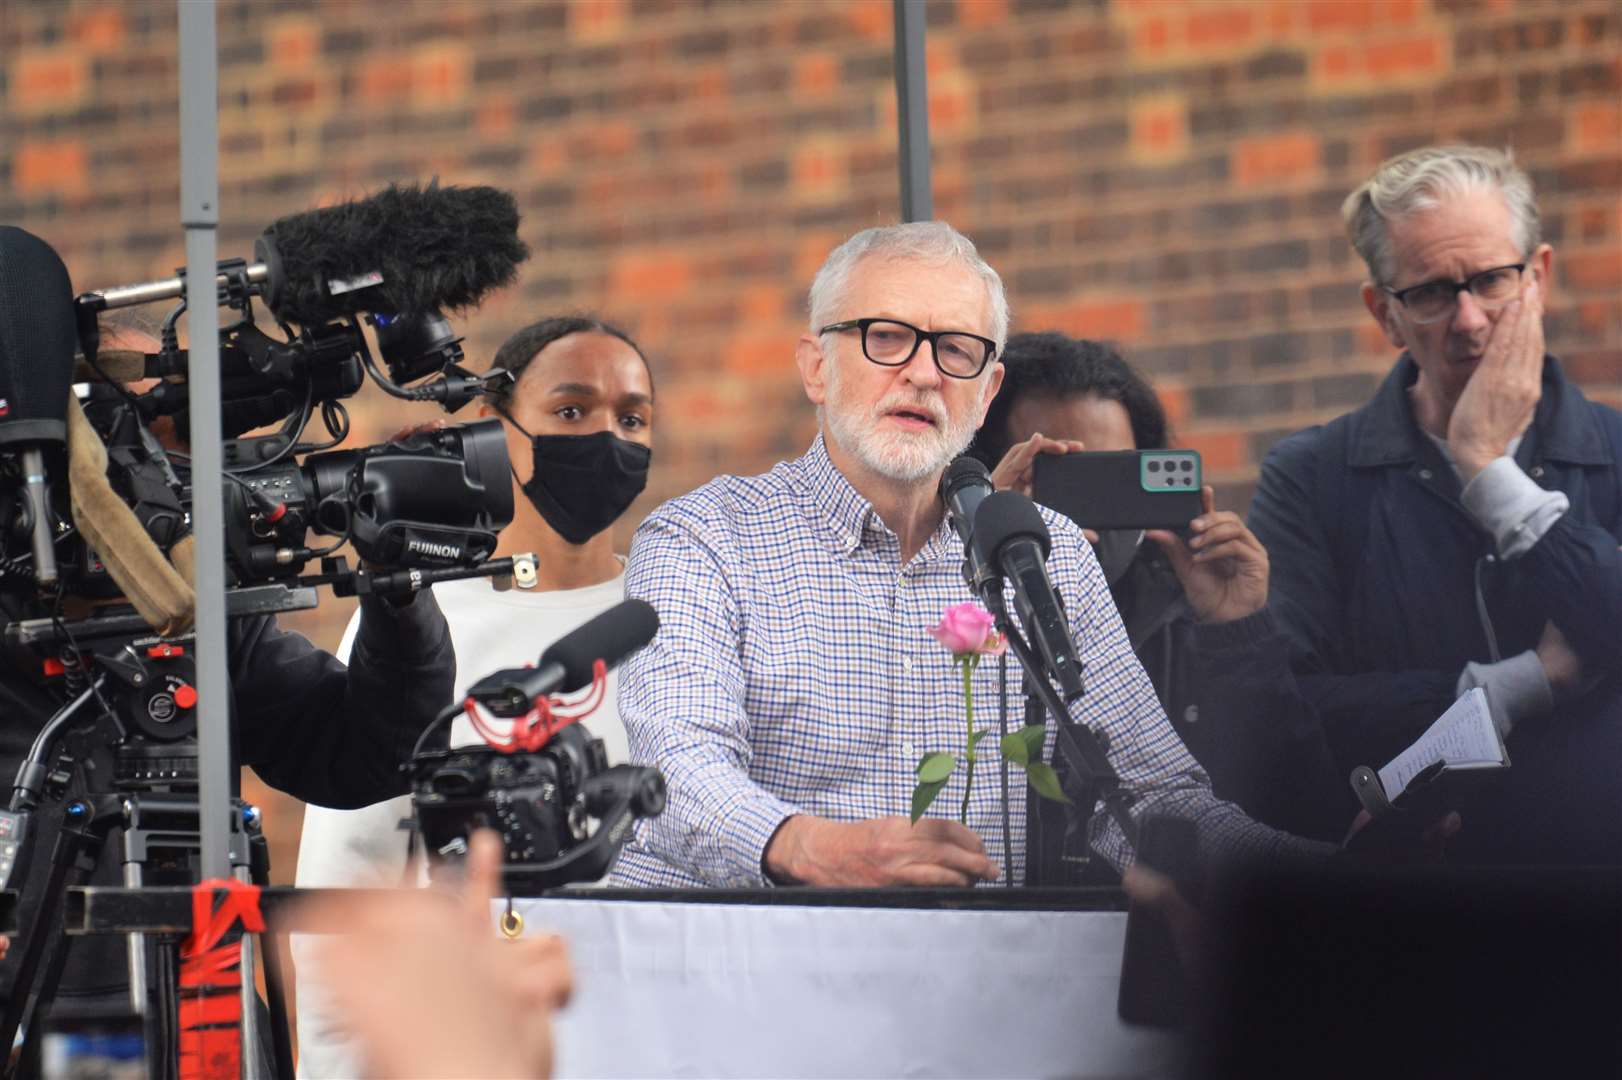 Former Labour Party leader Jeremy Corbyn speaks during a demonstration outside the Israeli embassy in London (Dominic Lipinski/PA)